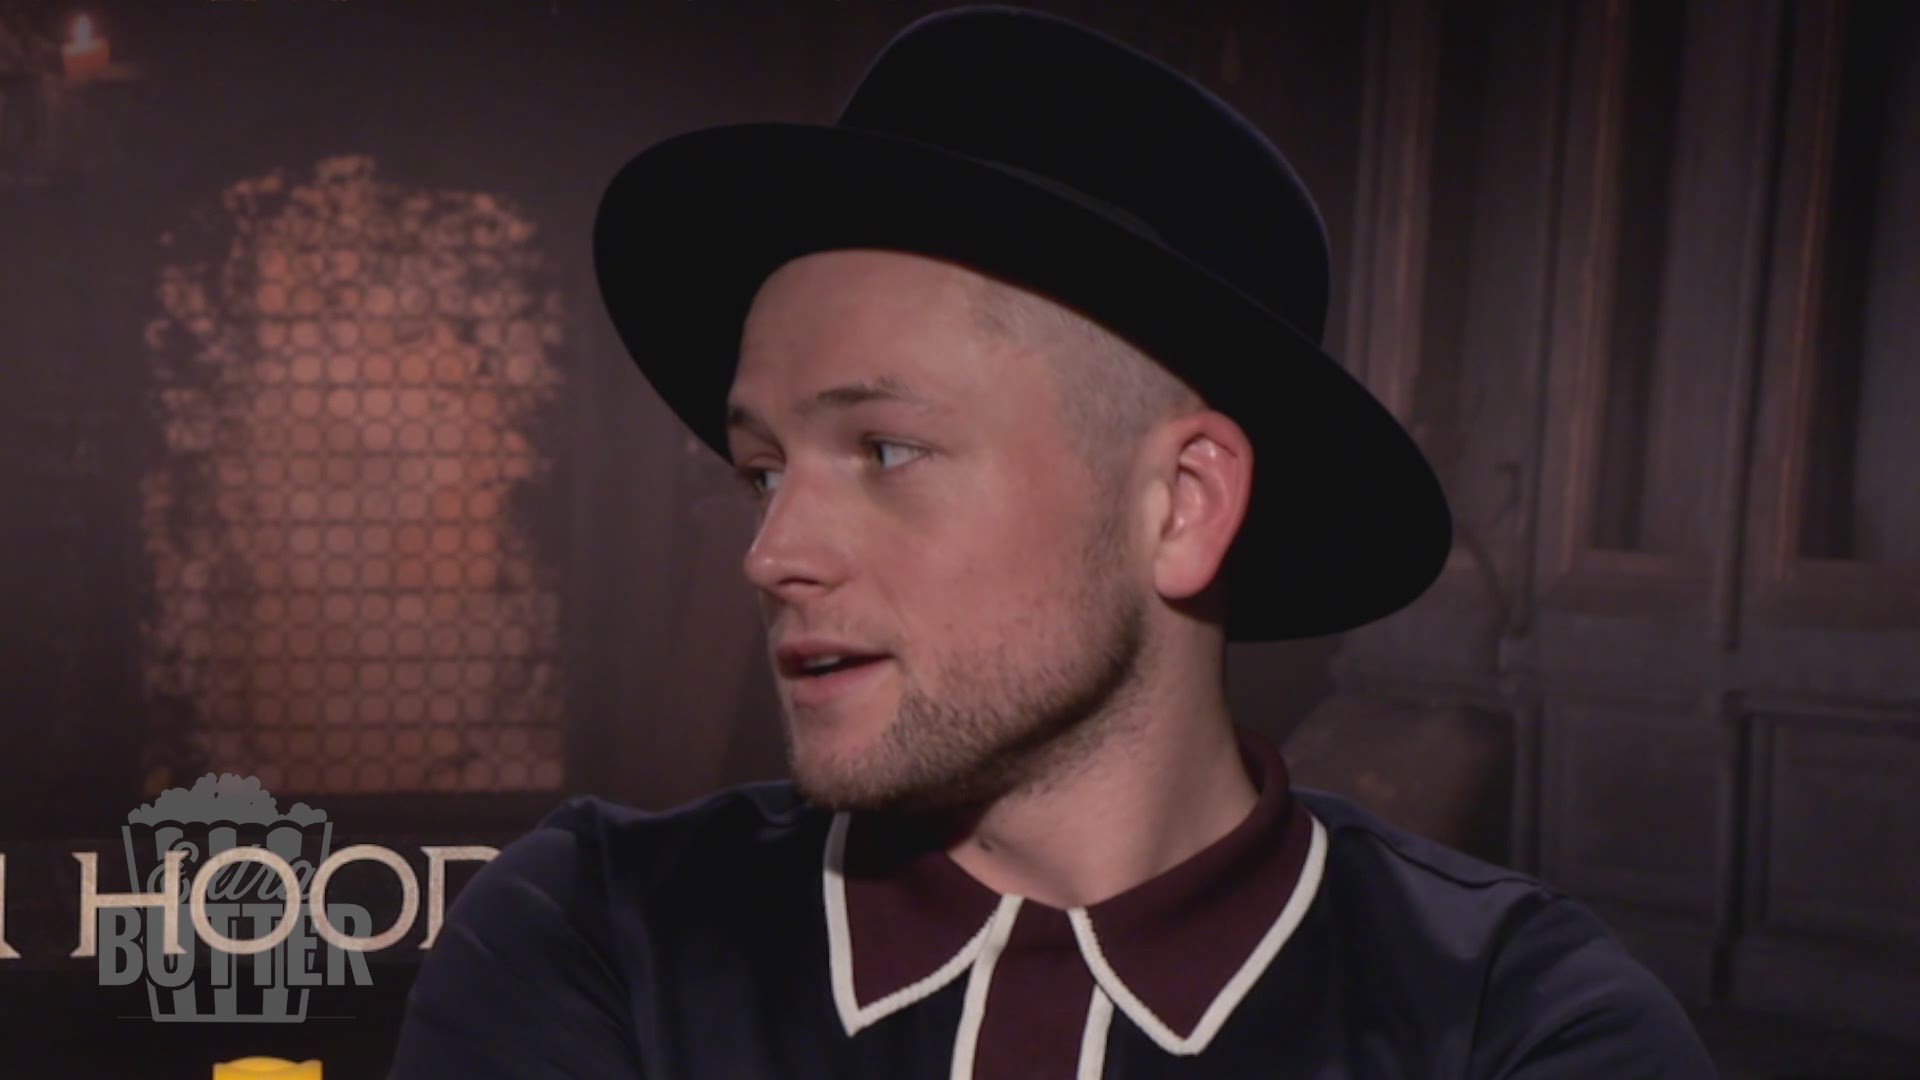 No strangers to singing for movies, Jamie and Taron create a theme song for 'Extra Butter.' The two also talk props with Mark S. Allen and what it took to learn archery and the other fighting skills in the movie. Interview provided by Lionsgate.